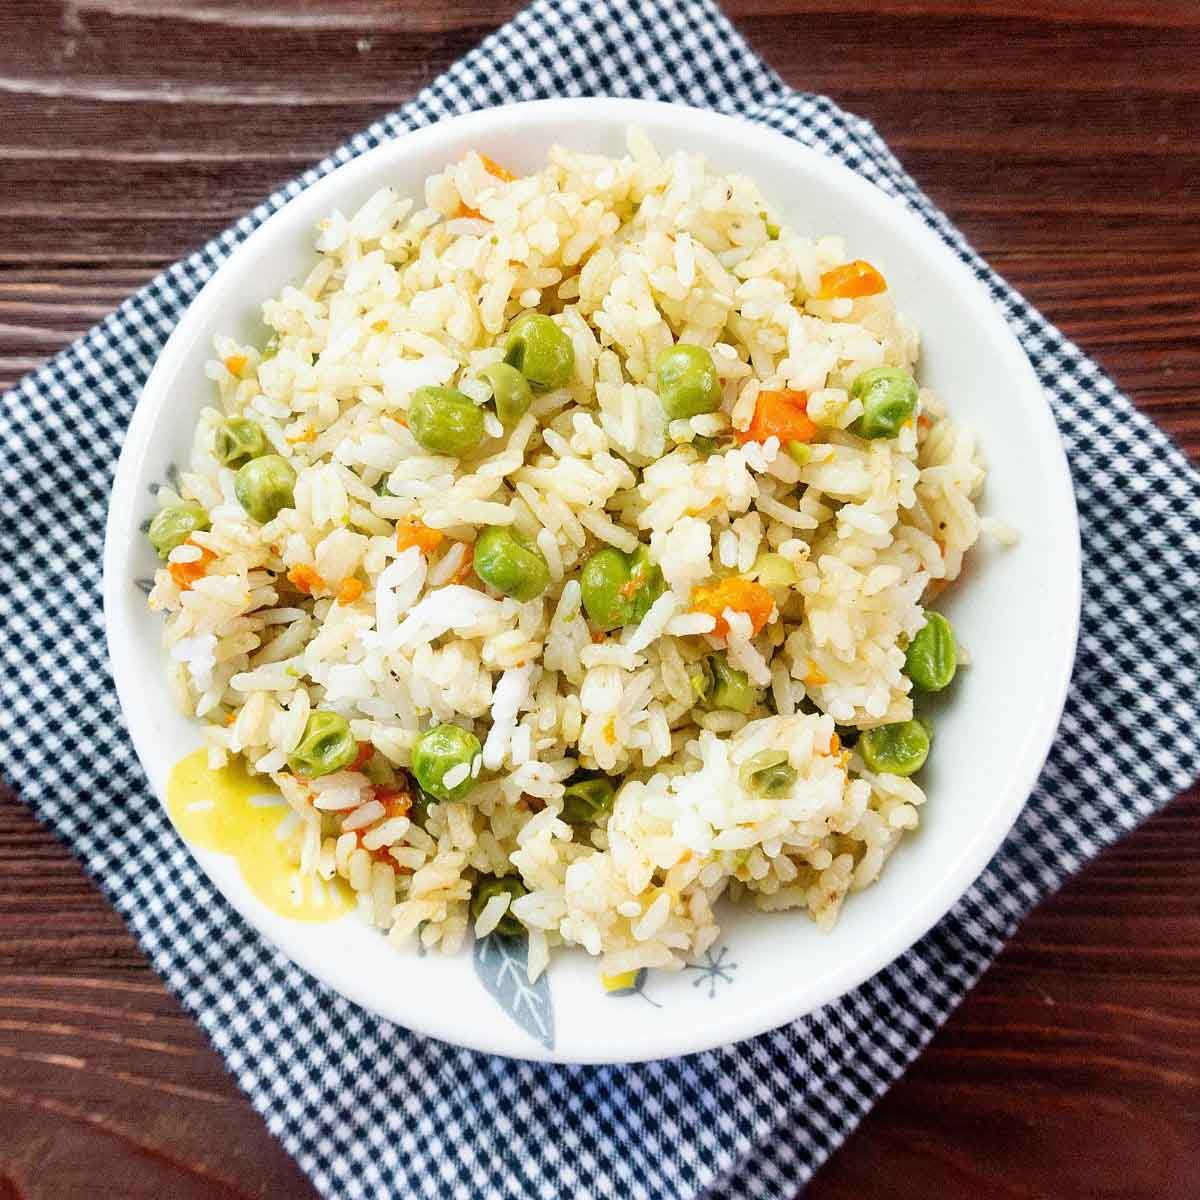 Thumbnail of Instant Pot vegetable fried rice.